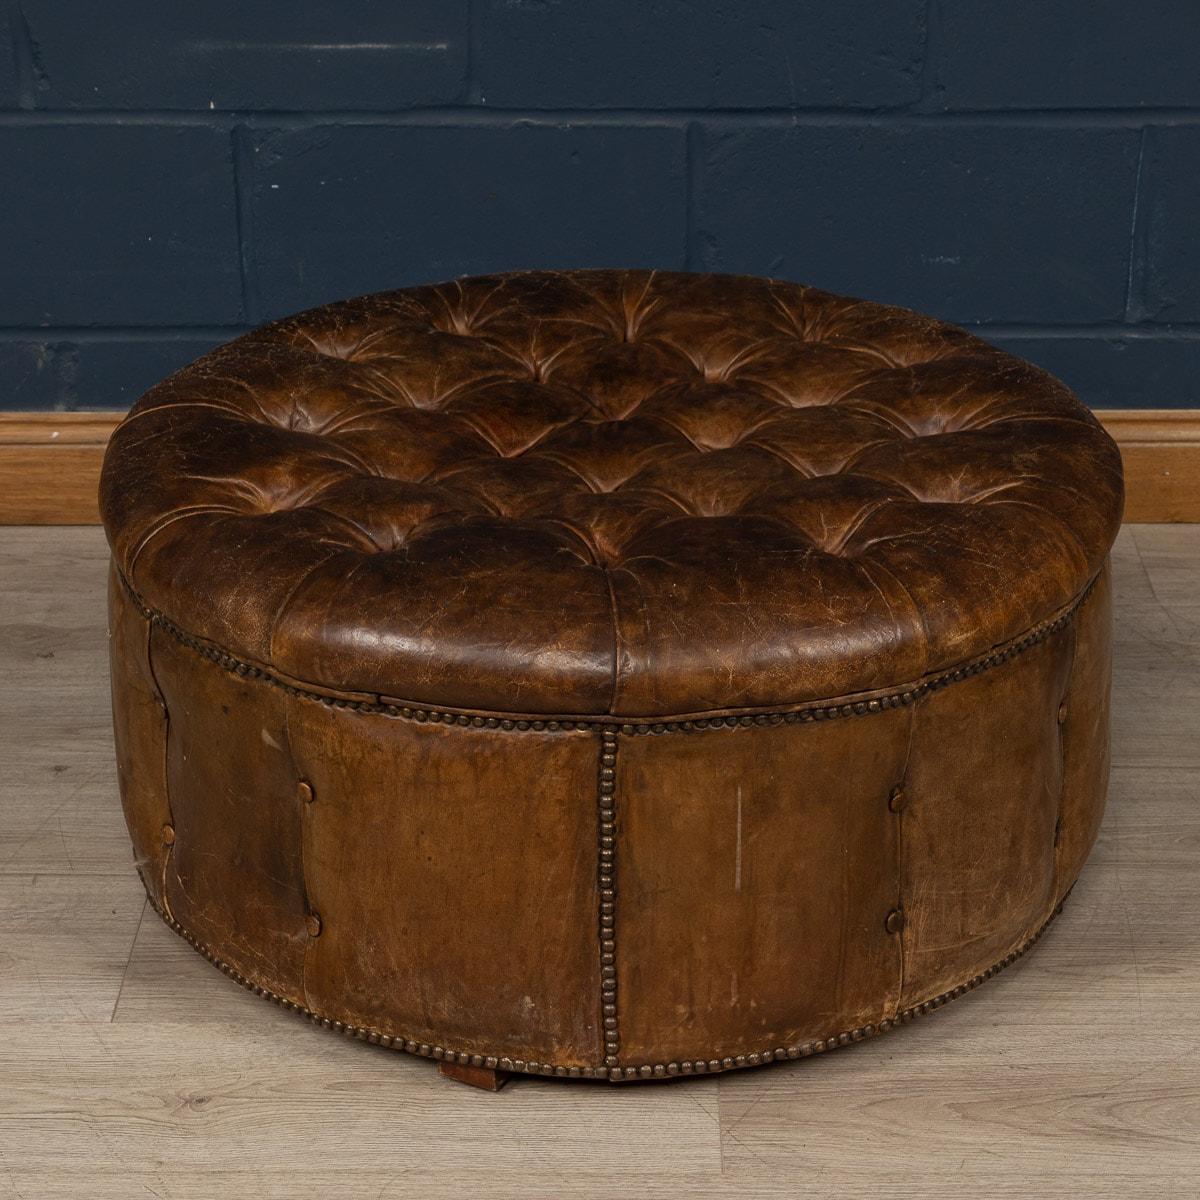 Chesterfield 20th Century English Large Round Brown Leather Button-Back Footstool